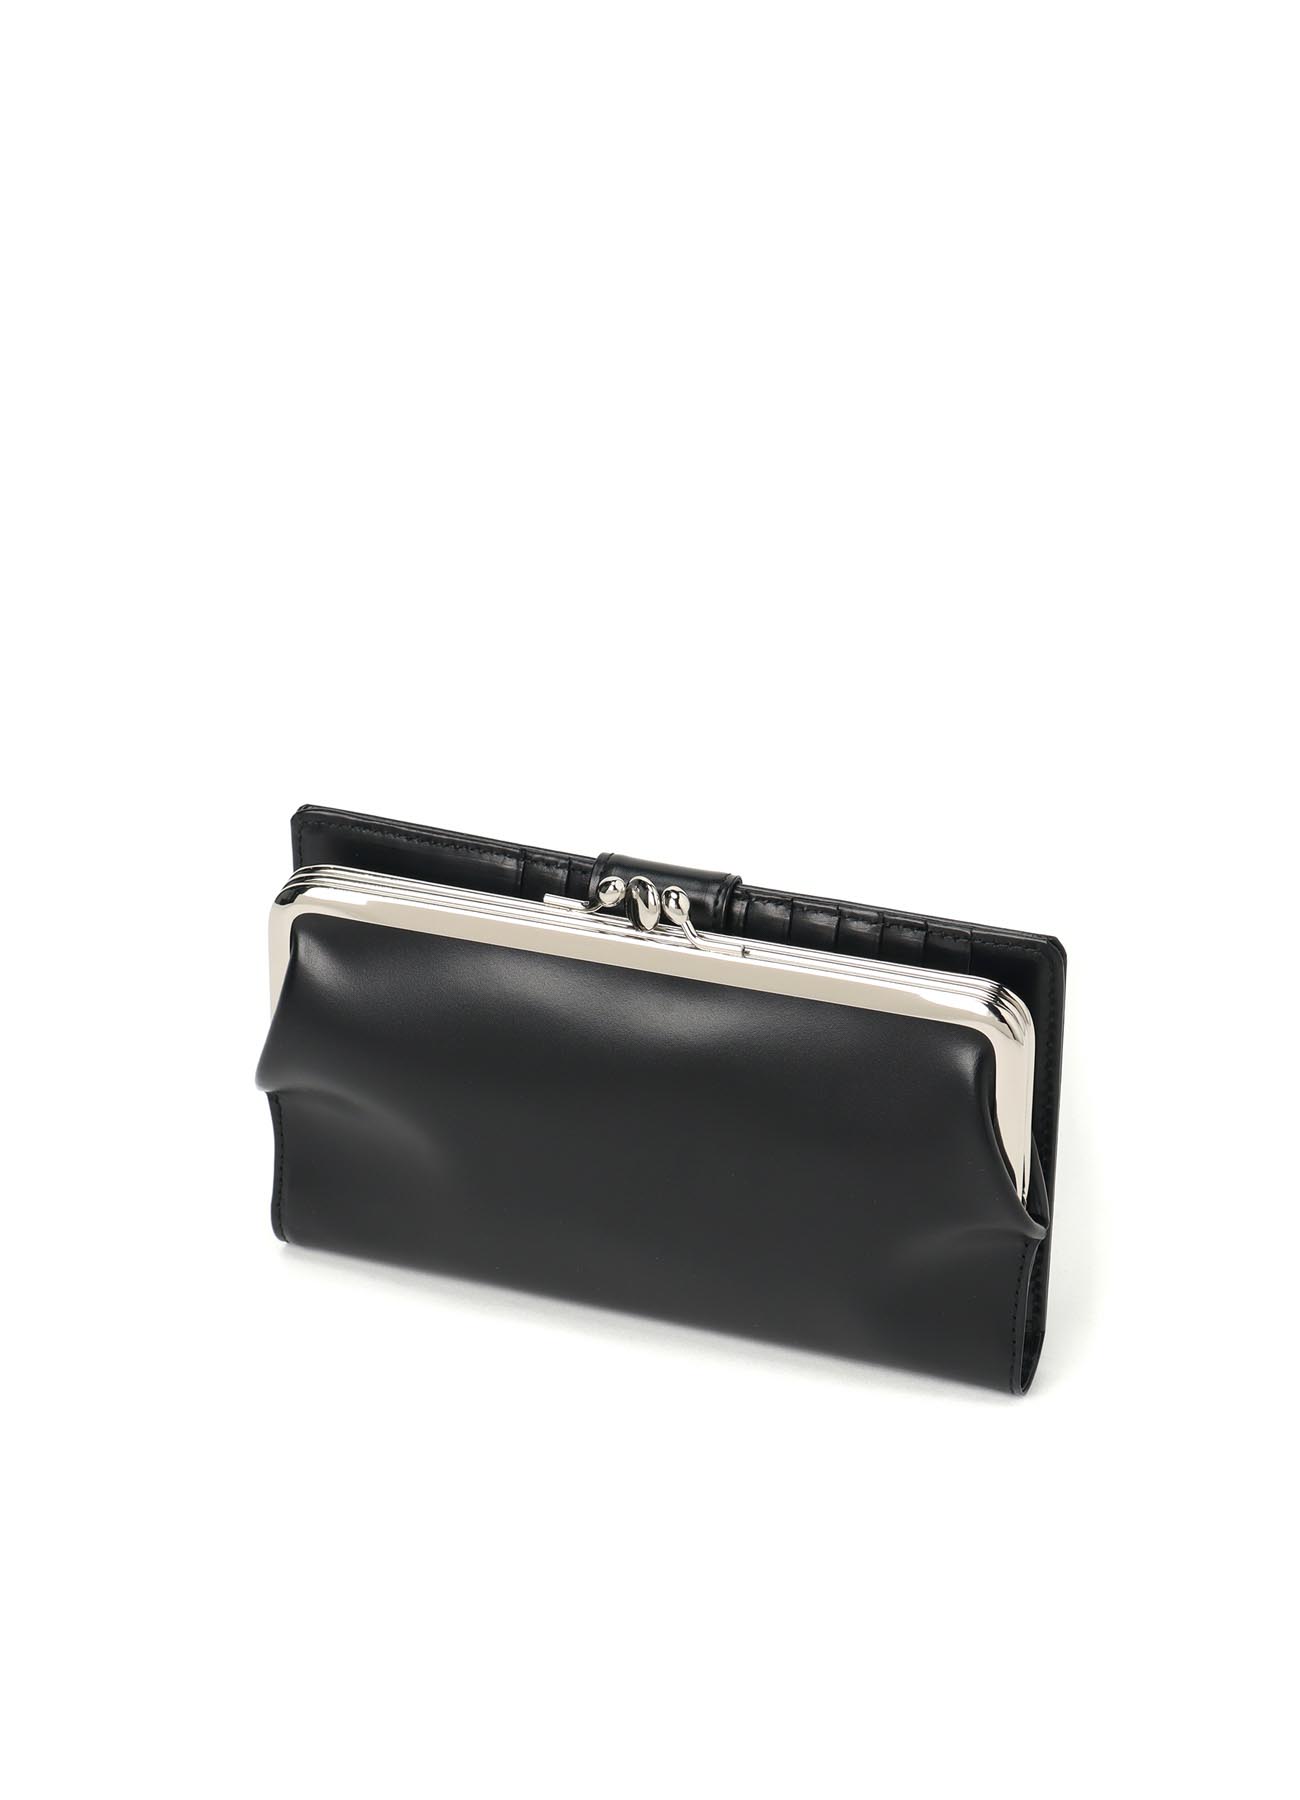 HIGH-GLOSS LEATHER LONG CLASP PURSE